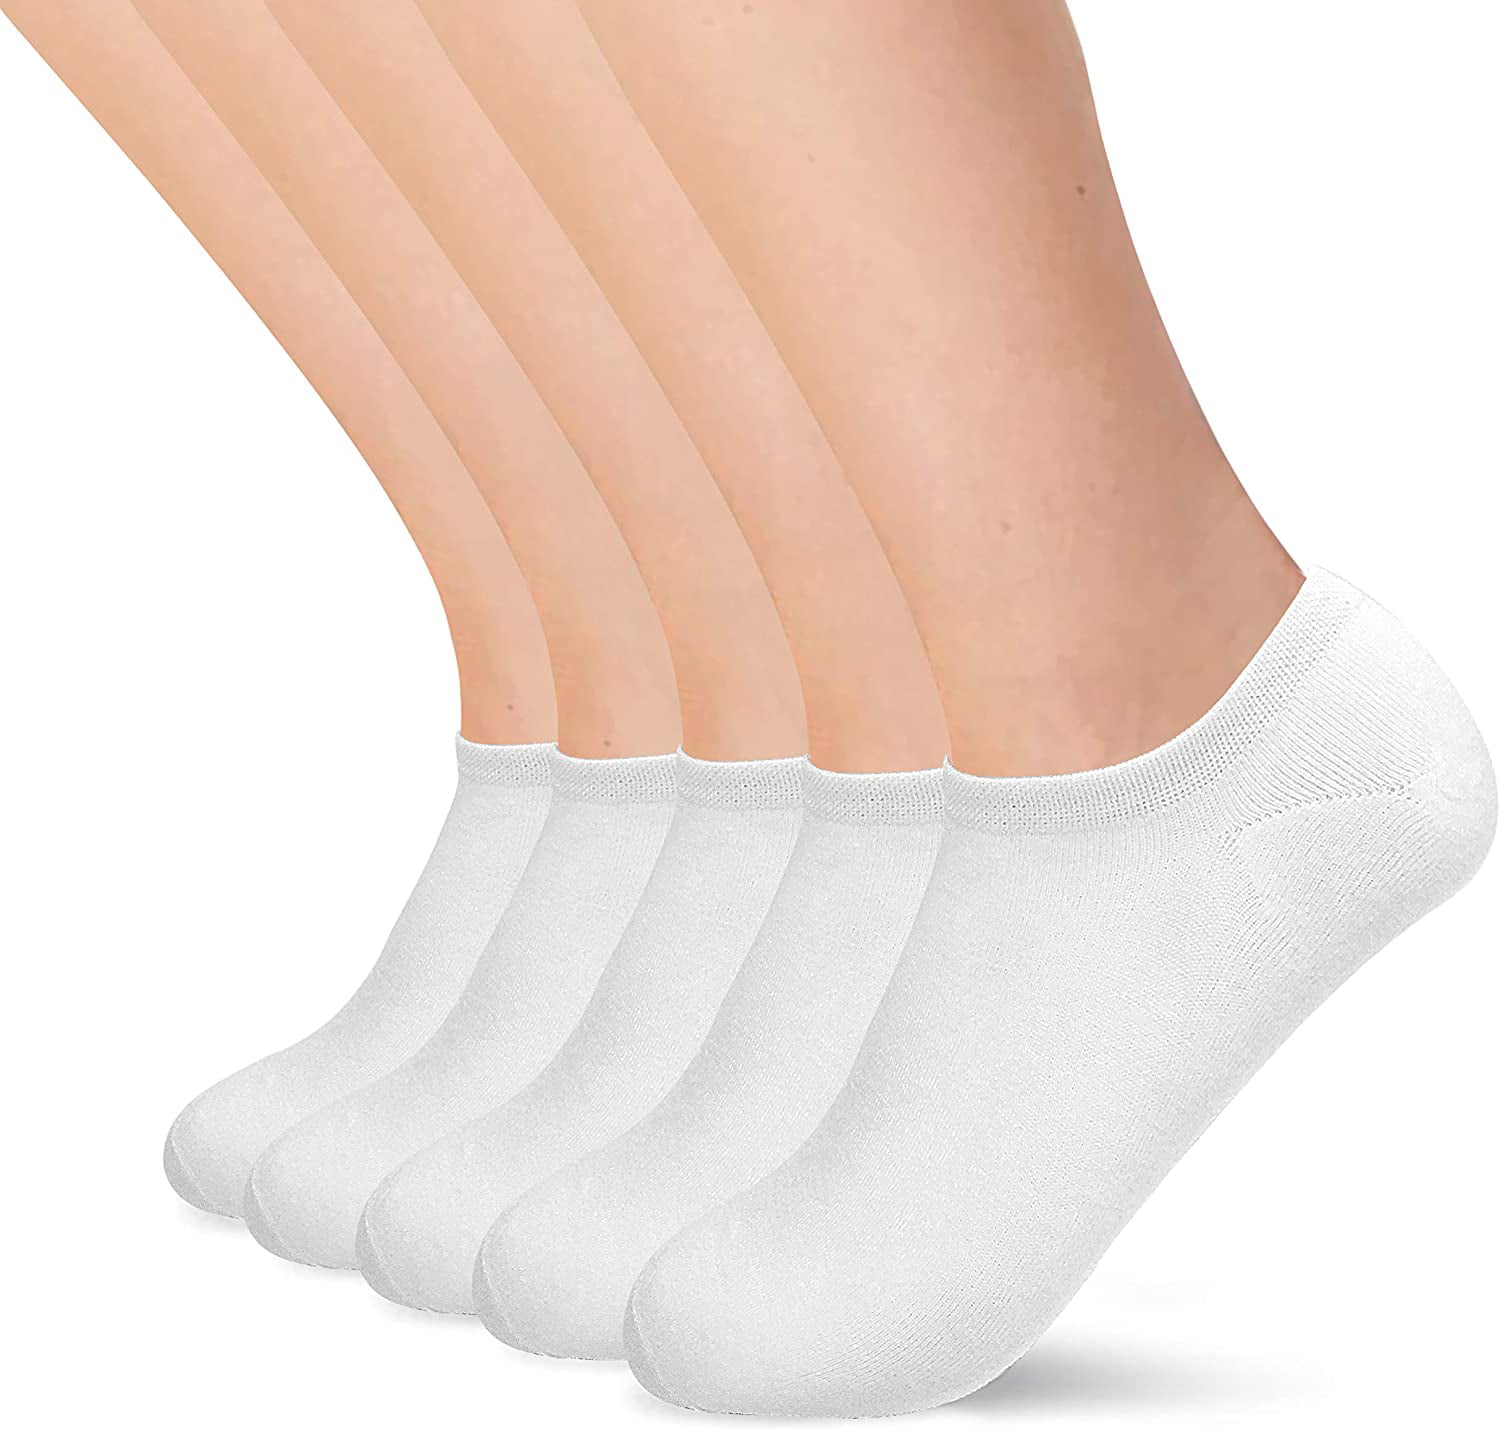 6 Pairs Bamboo Fabric Breathable No Show Socks Low Cut 